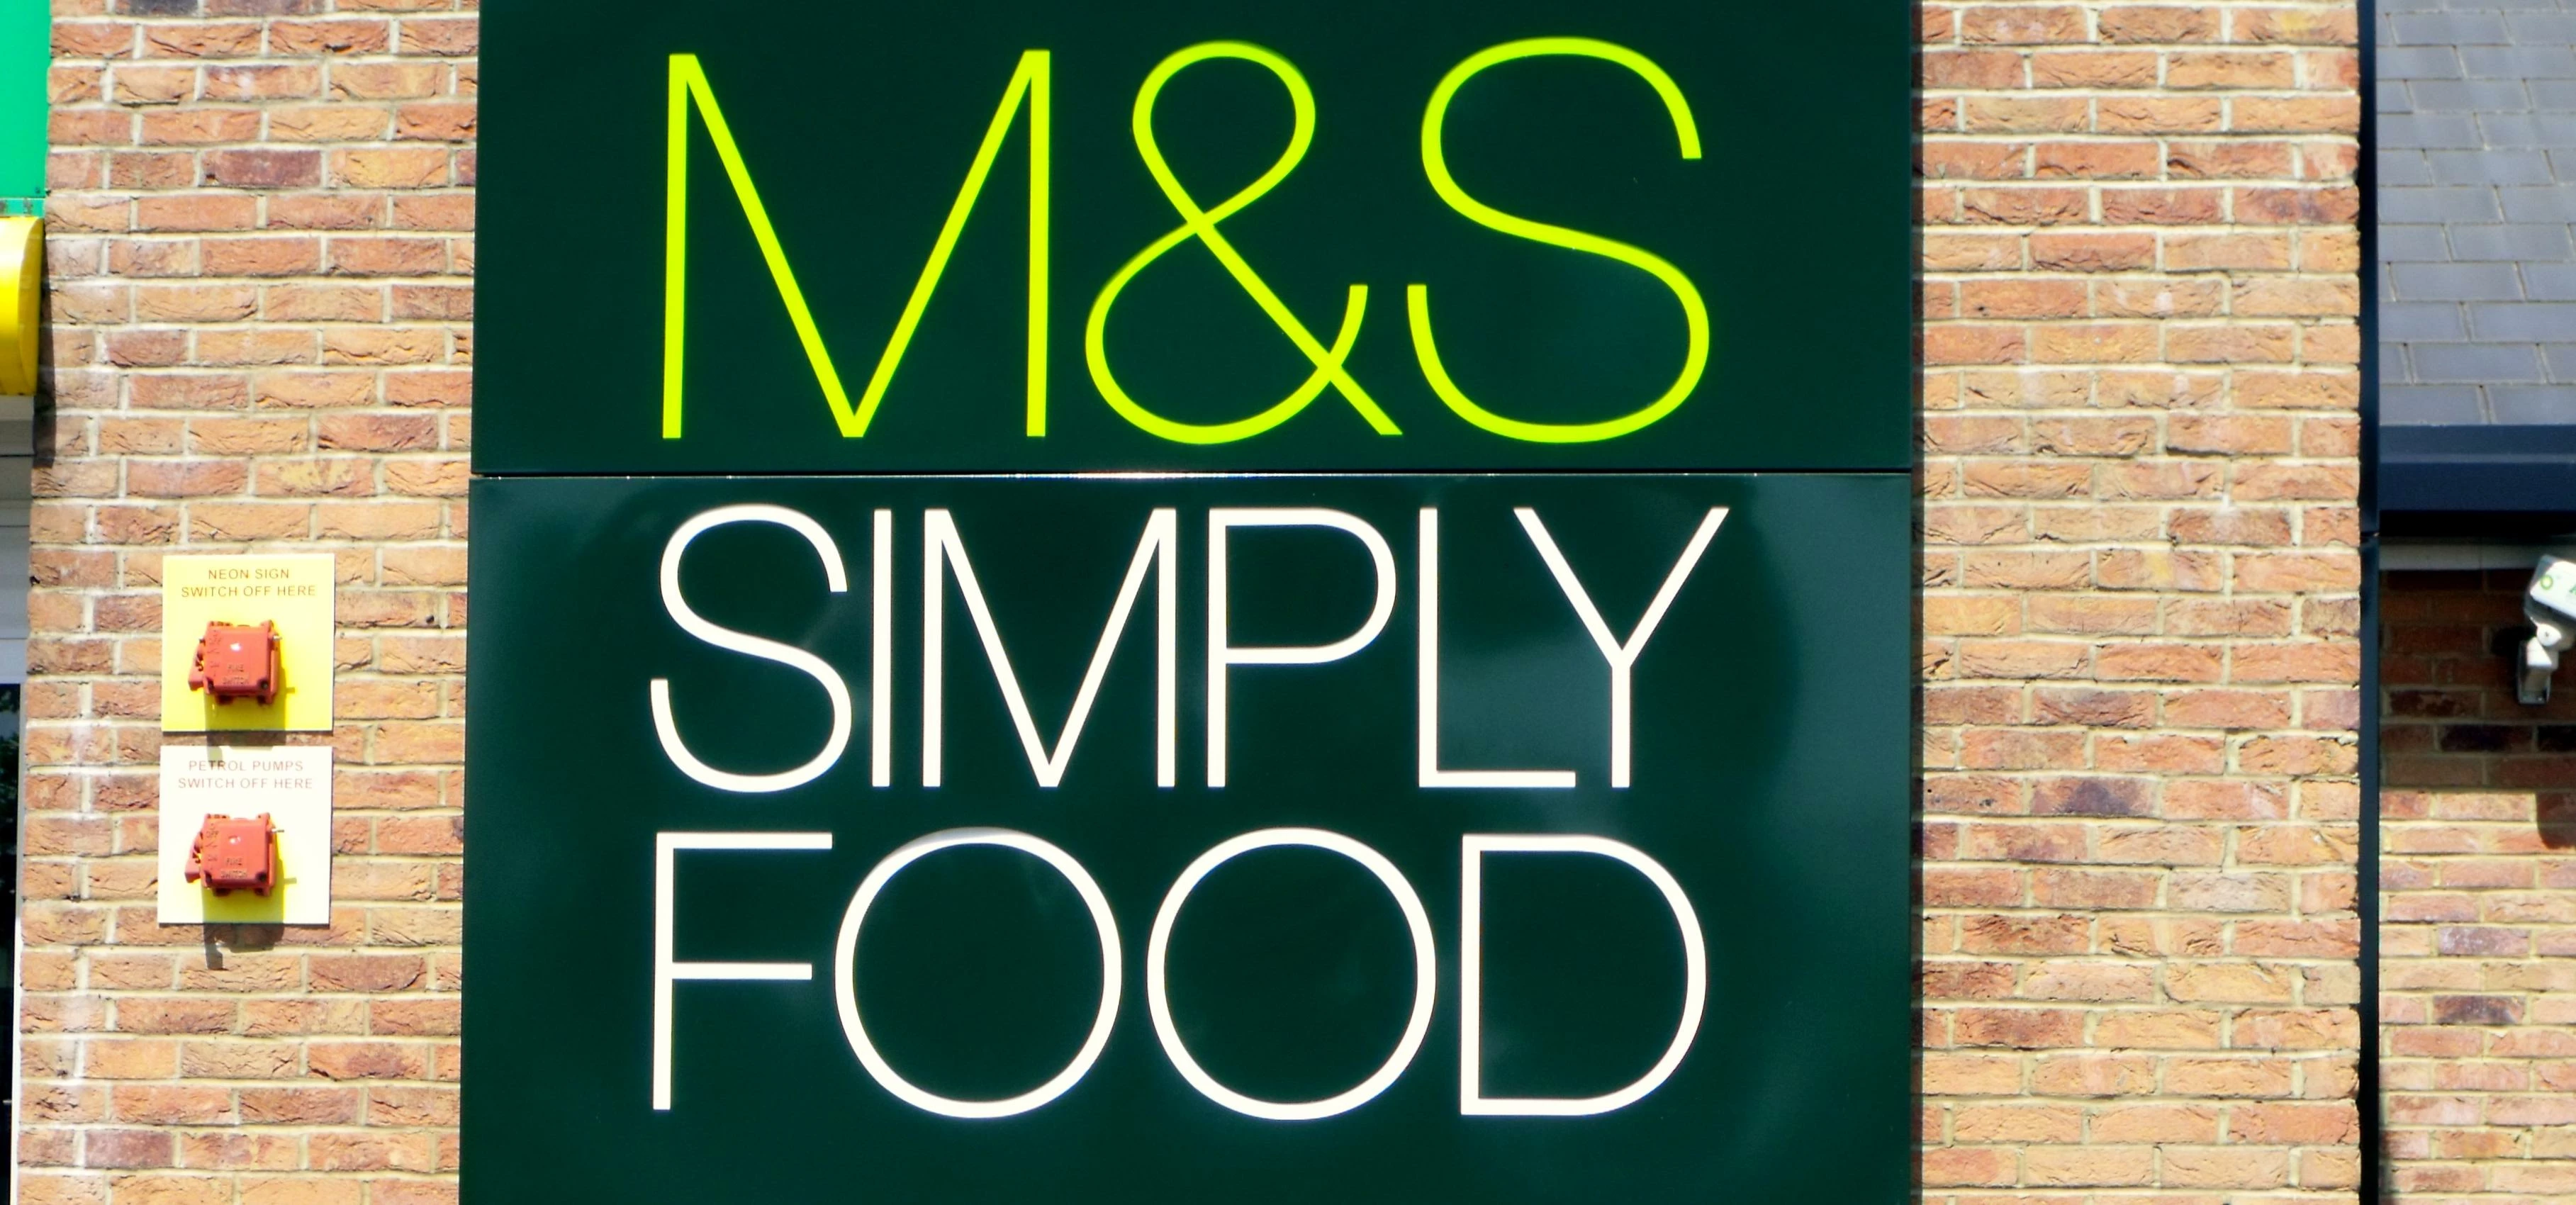 Marks and Spencer's